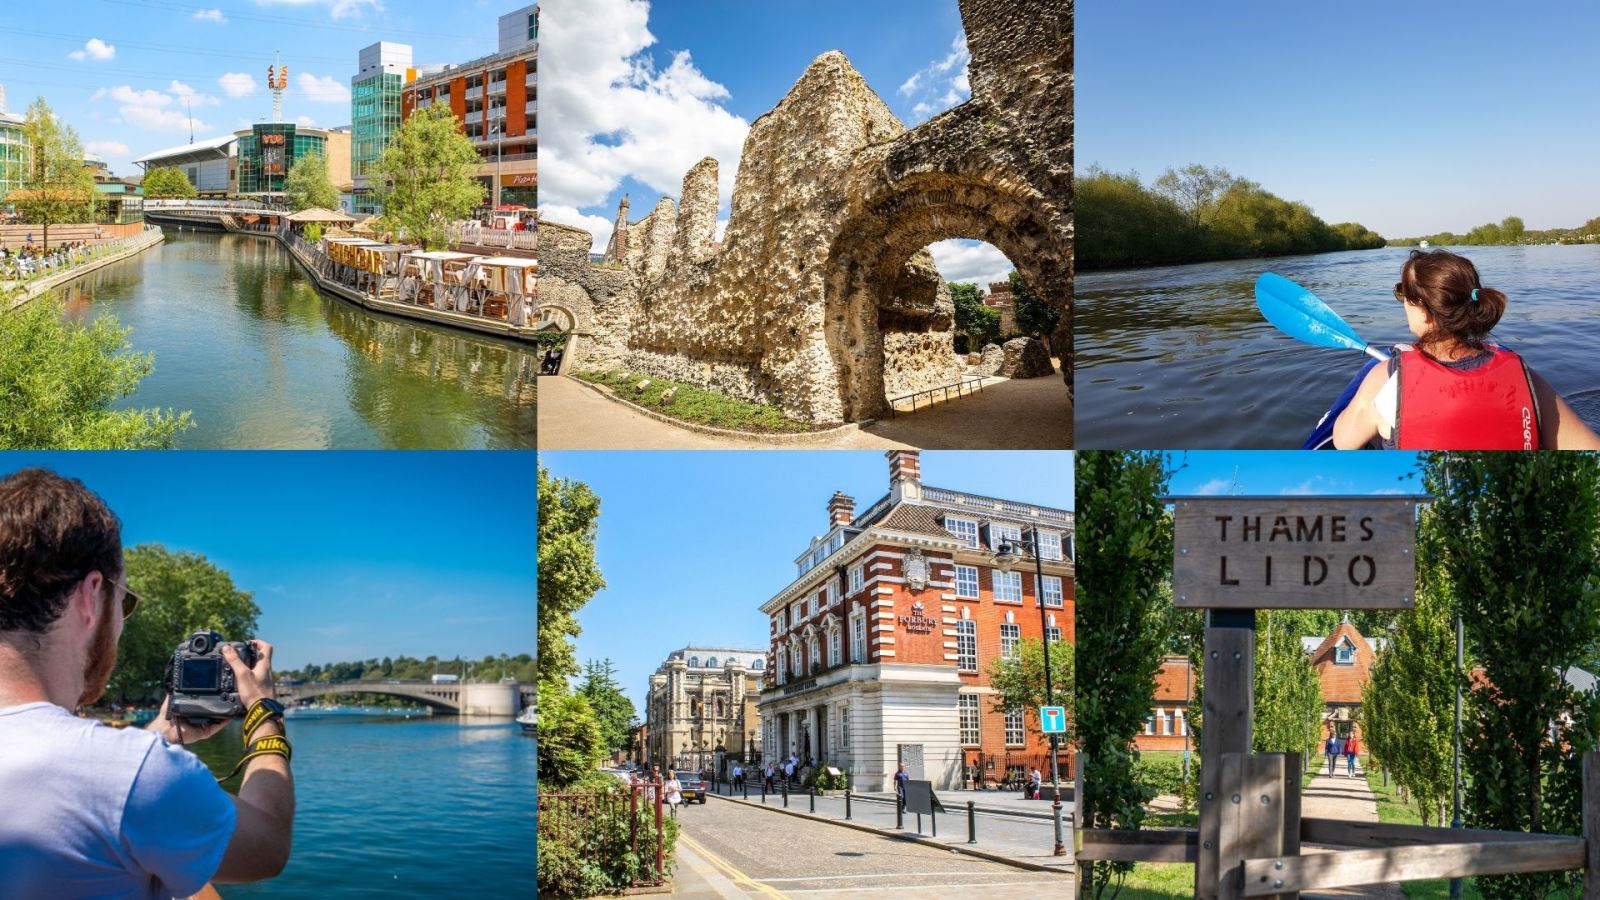 Collage of the Oracle Riverside, Abbey Ruins, lady rowing, man on boat cruise, Roseate Hotel and Lido Spa